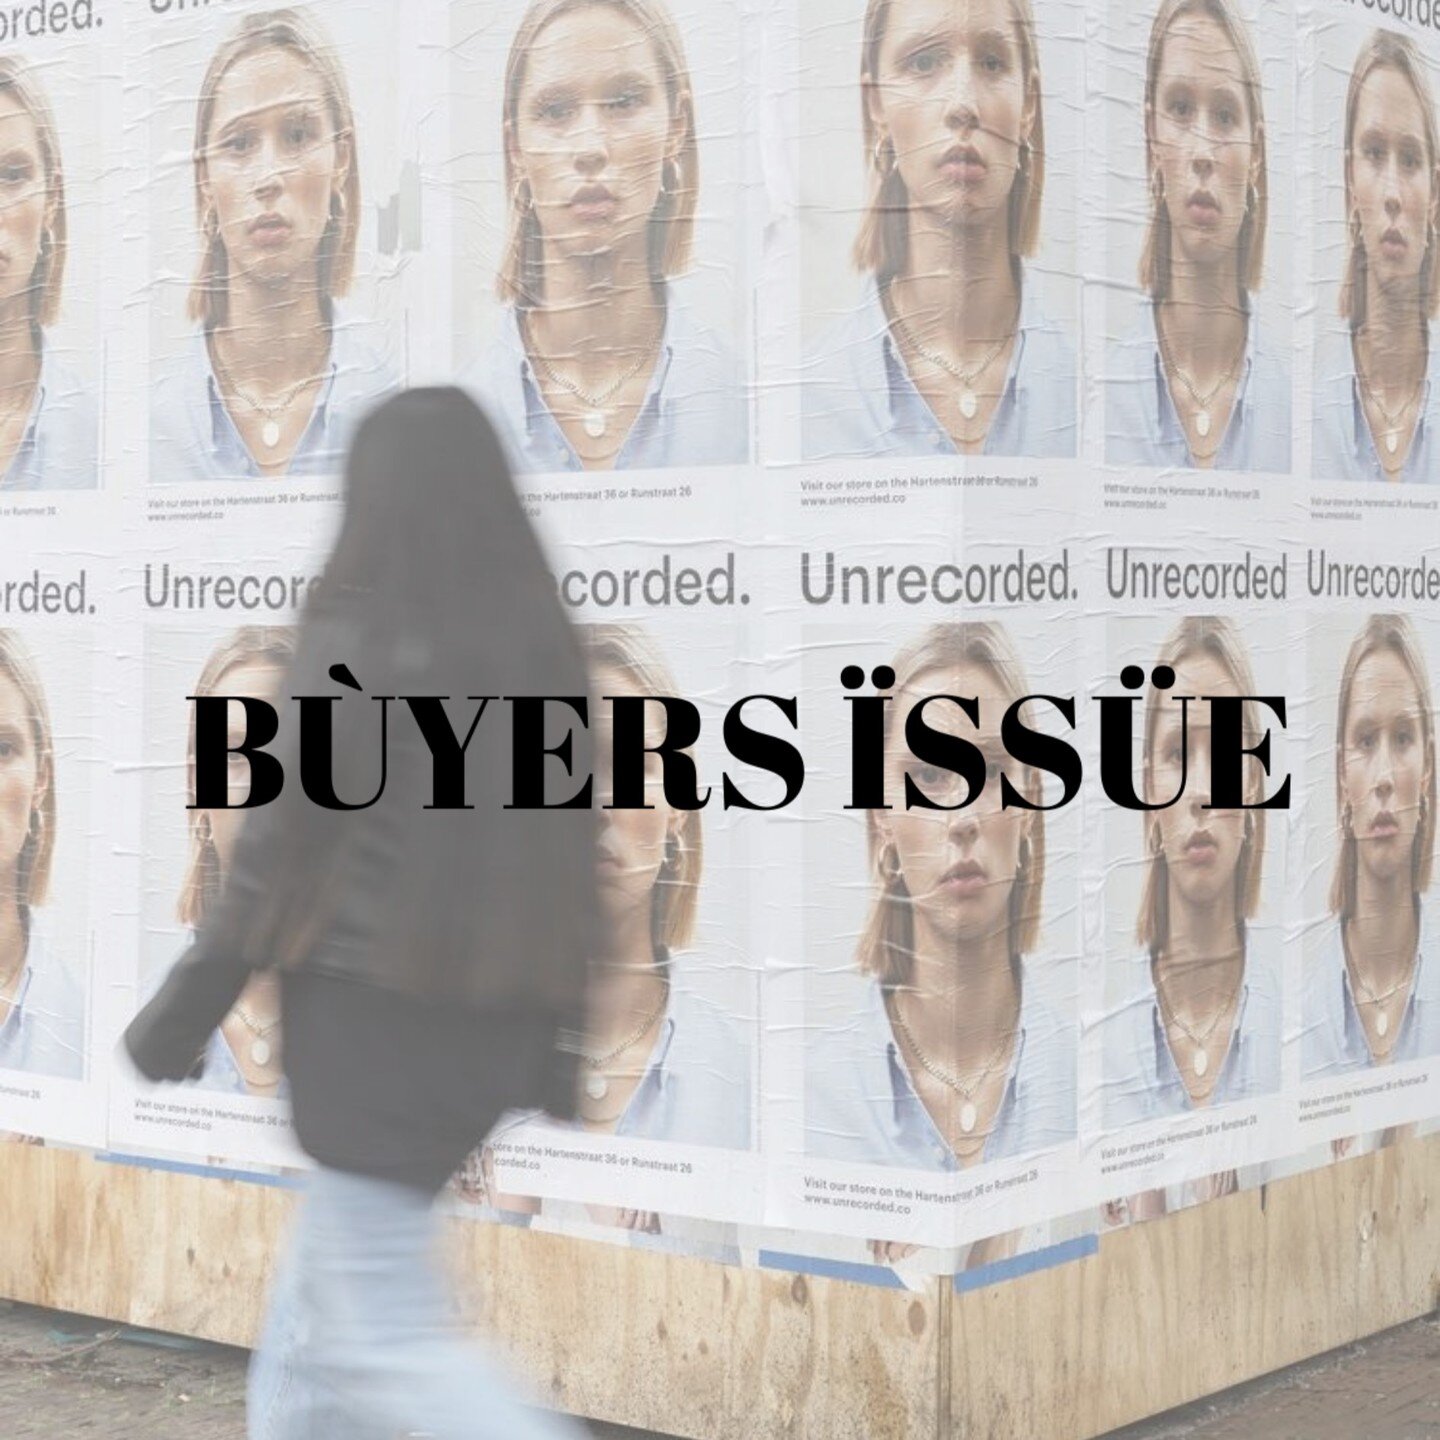 Introducing the ultimate exclusive digital showroom - a new era of luxury wholesale. At Buyer's Issue, we are proud to offer the first exclusive luxury catalogue designed to connect start-up &amp; young luxury and premium fashion brands with internat